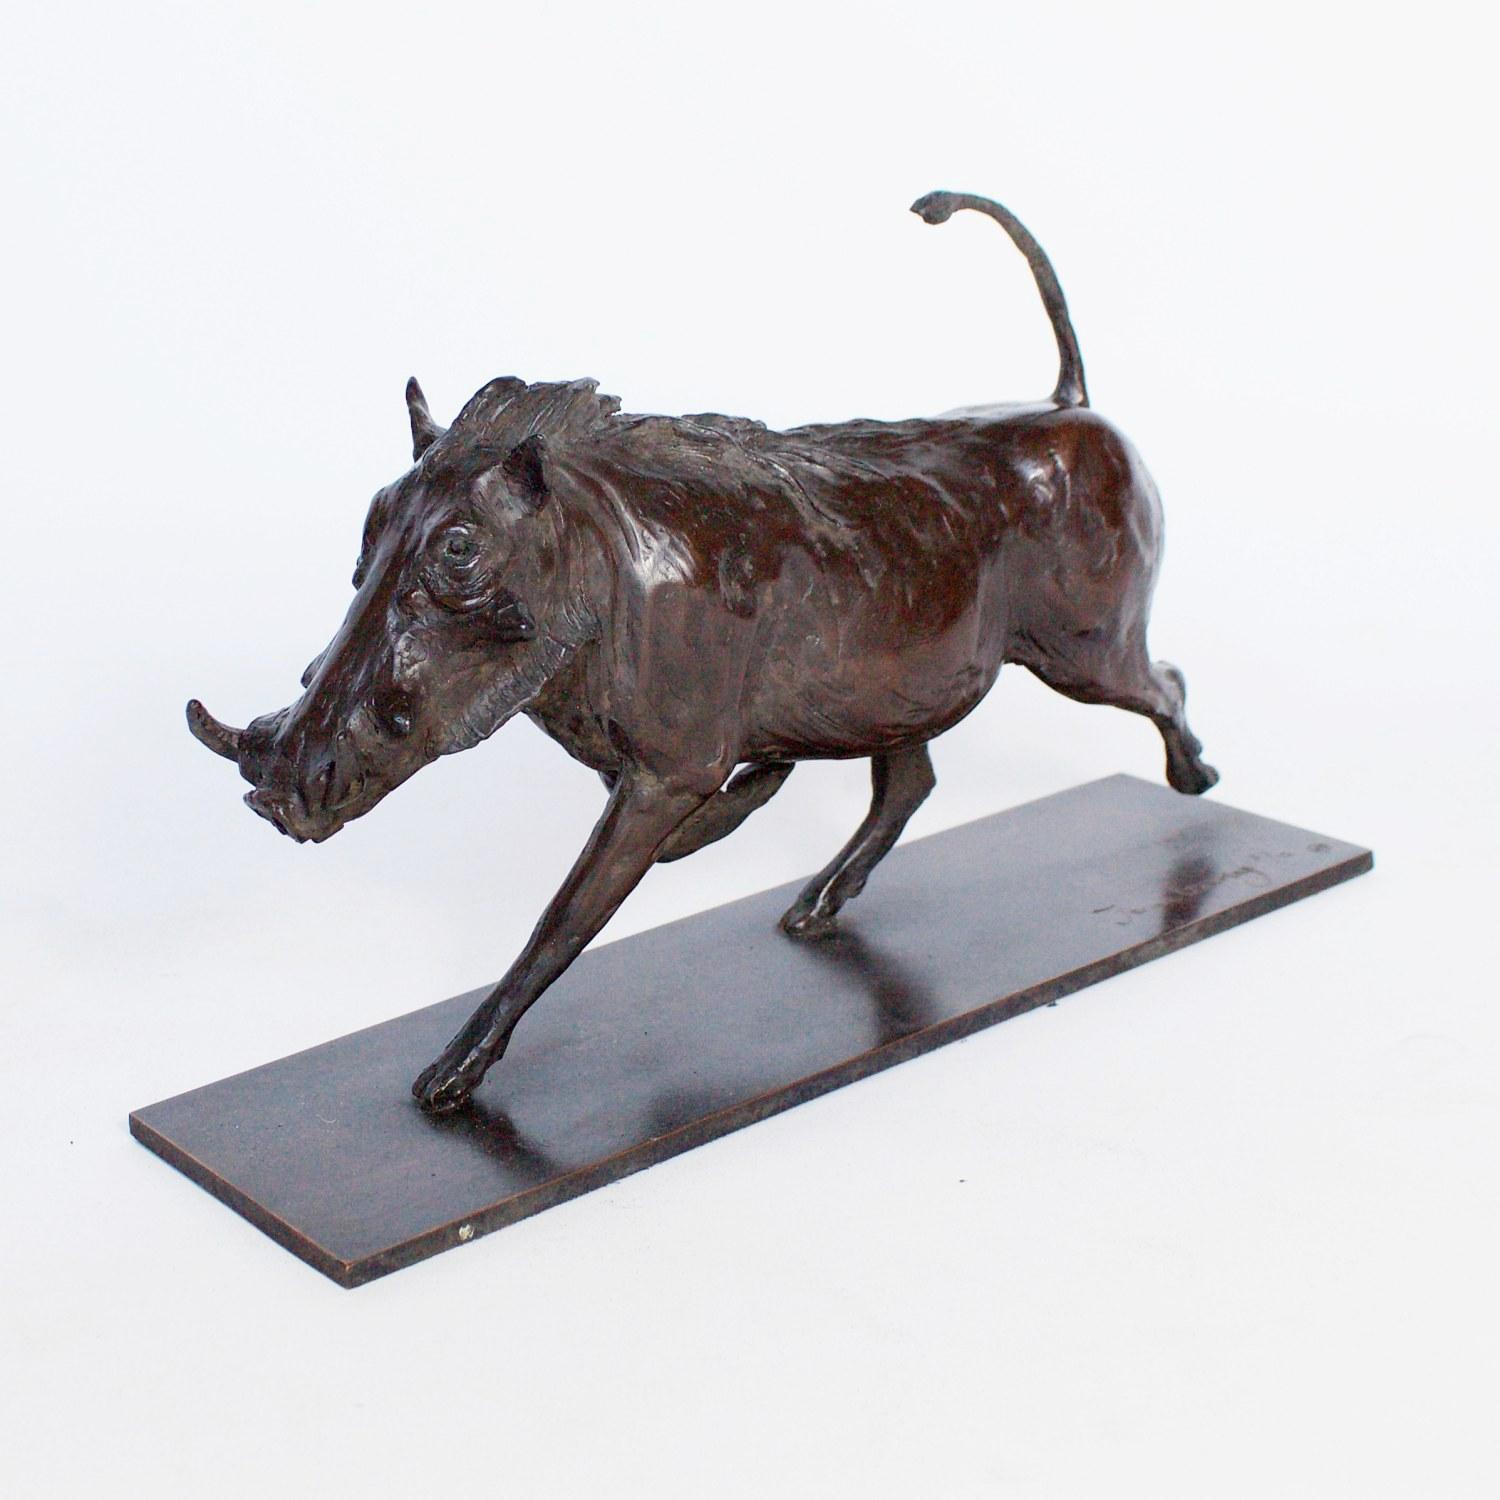 A Contemporary bronze sculpture of a trotting Warthog by Artist Jenna Gearing. Rich dark brown patination and fine hand finished detail. Limited edition 2/12. Signed Jenna Gearing to base. 

Jenna Gearing is a contemporary sculptor who's interest